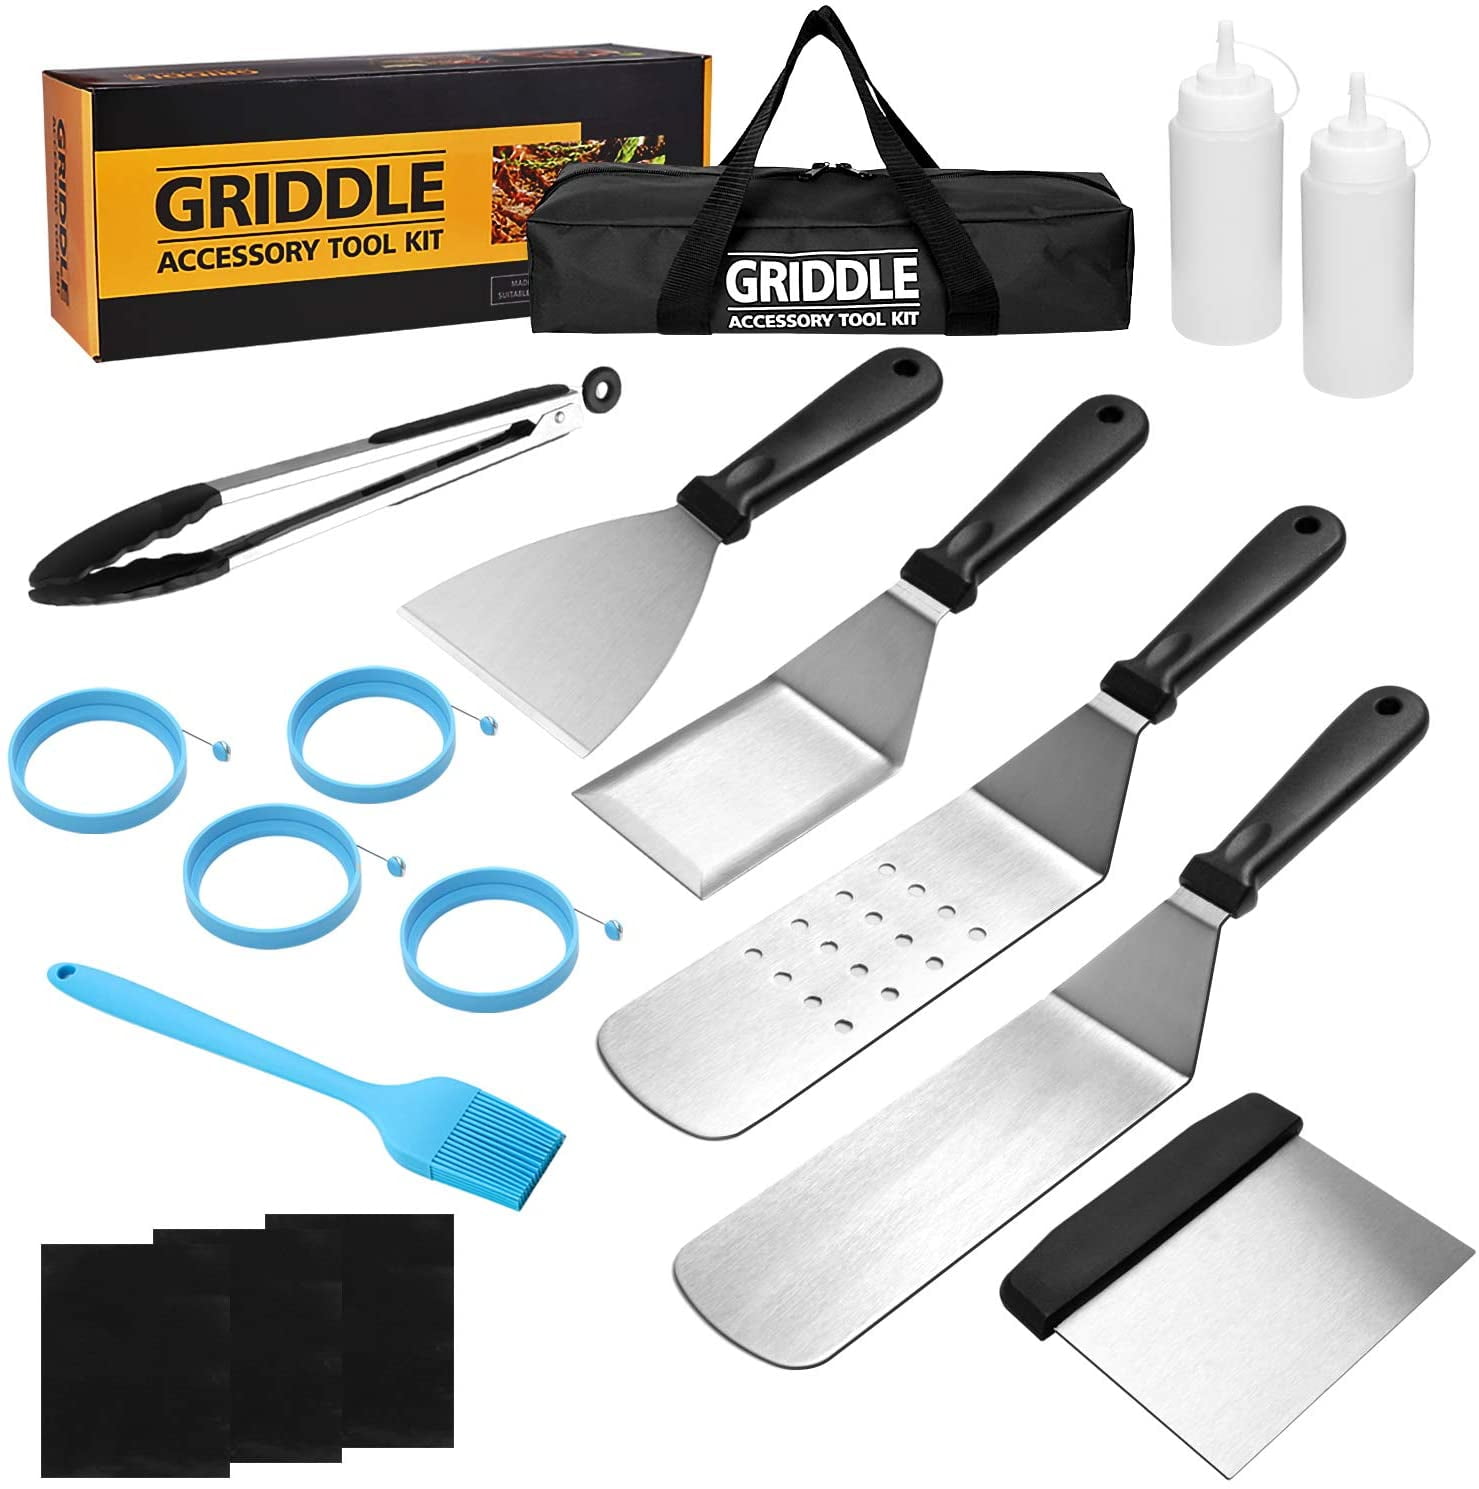 USA* FREE SHIPPING Multicolor Blackstone 1542 Griddle Accessory Tool Kit 